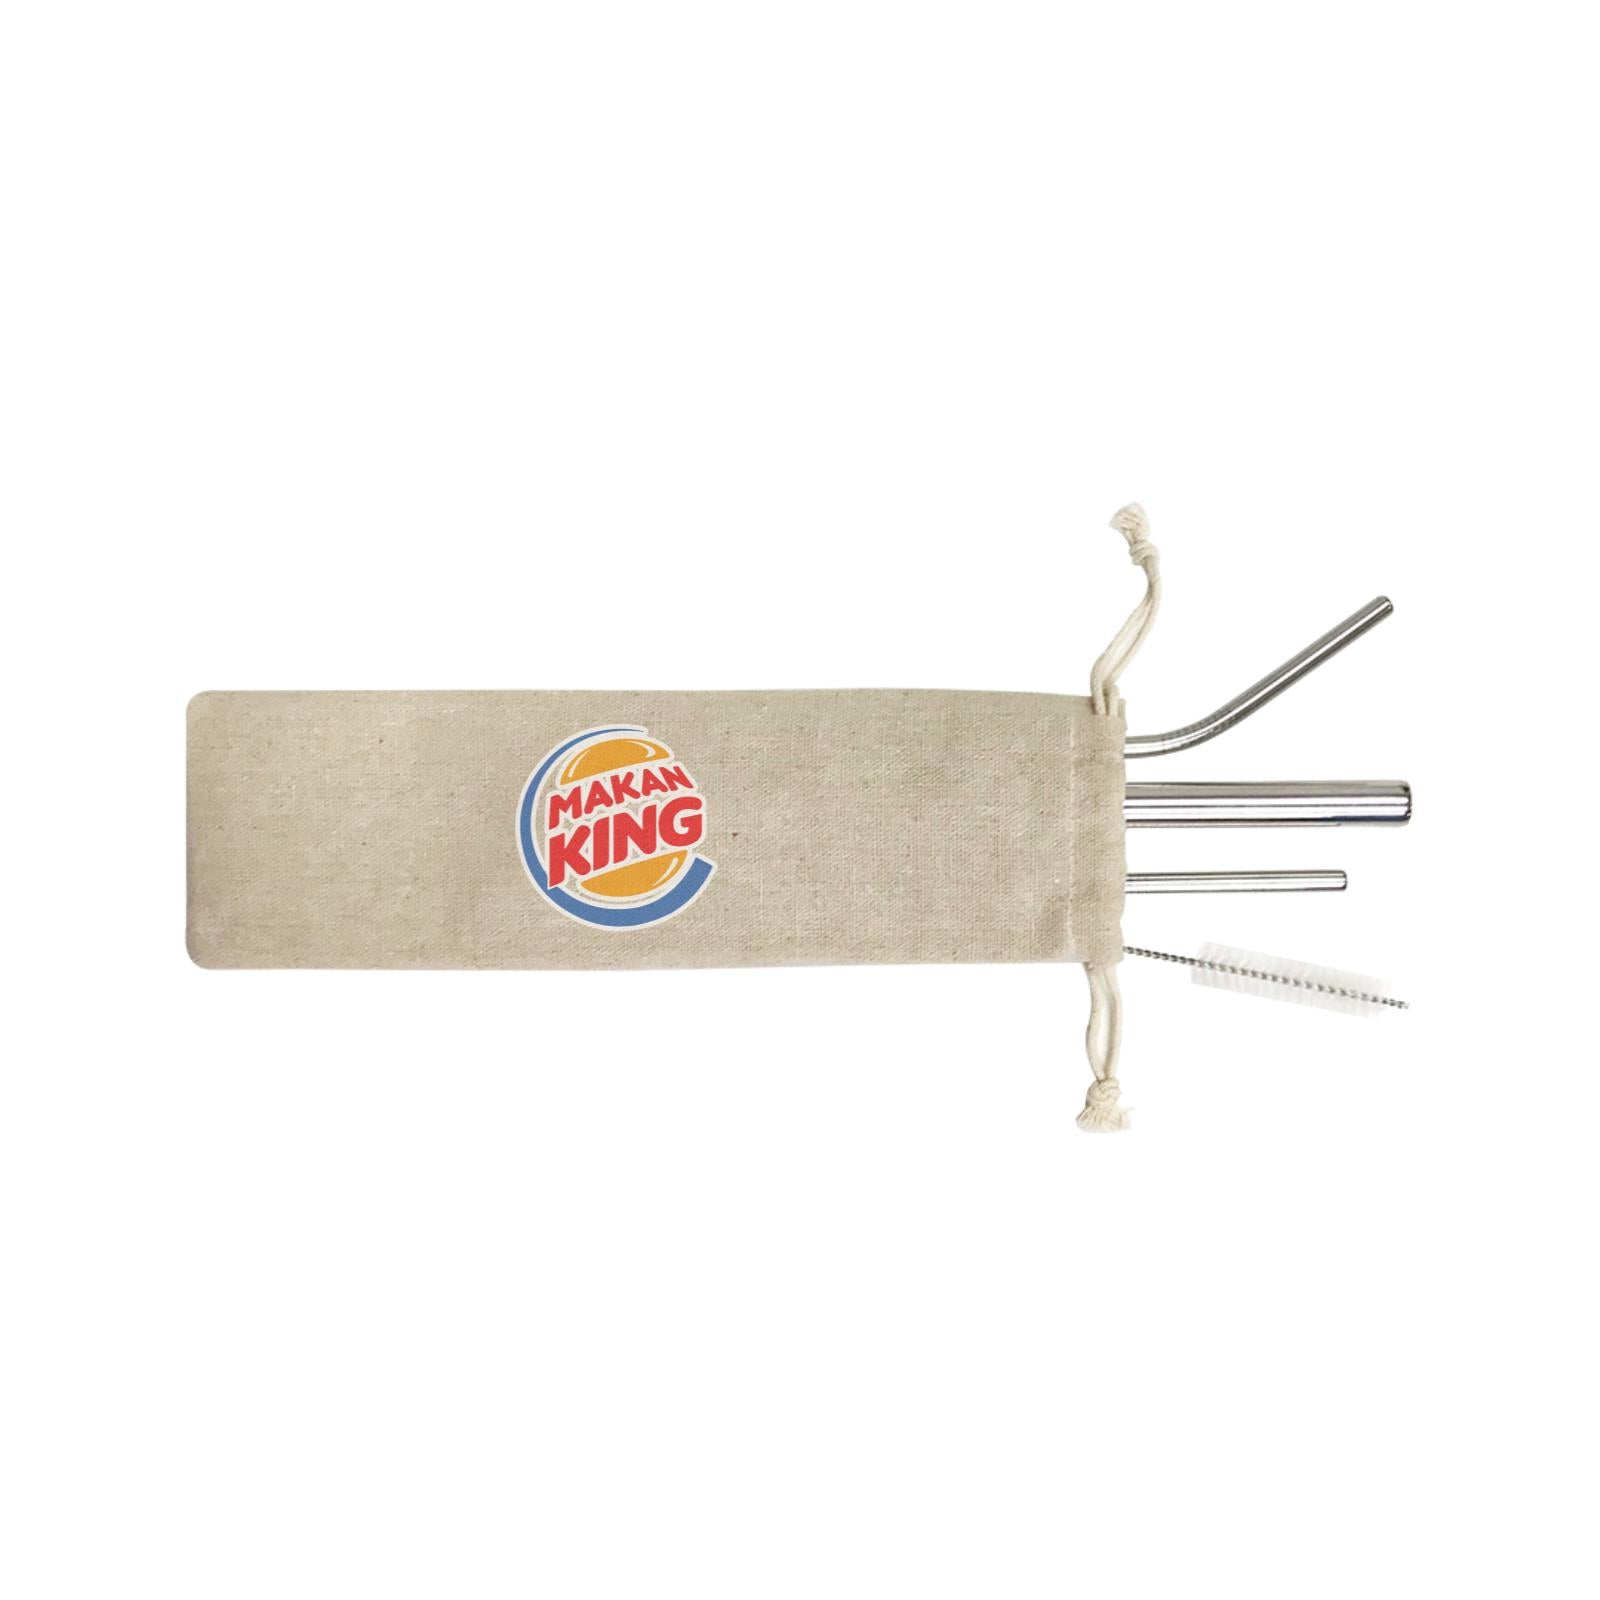 Slang Statement Makan King 4-in-1 Stainless Steel Straw Set In a Satchel